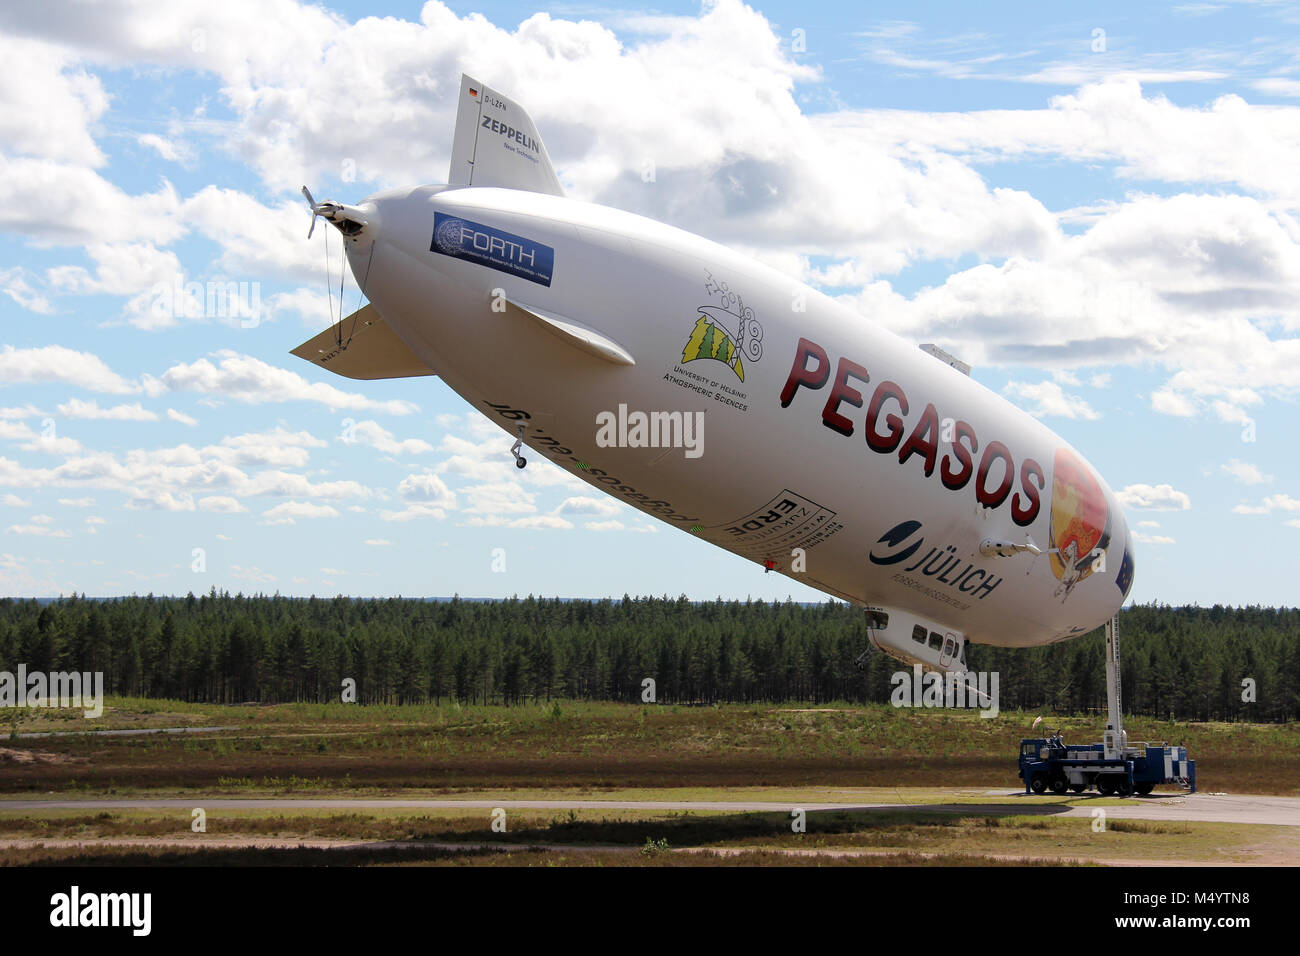 JAMIJARVI, FINLAND - JUNE 15, 2013: Pegasos Zeppelin NT airship attached to mast in Jamijarvi, Finland on June 15, 2013 after completing the ca. 30 re Stock Photo